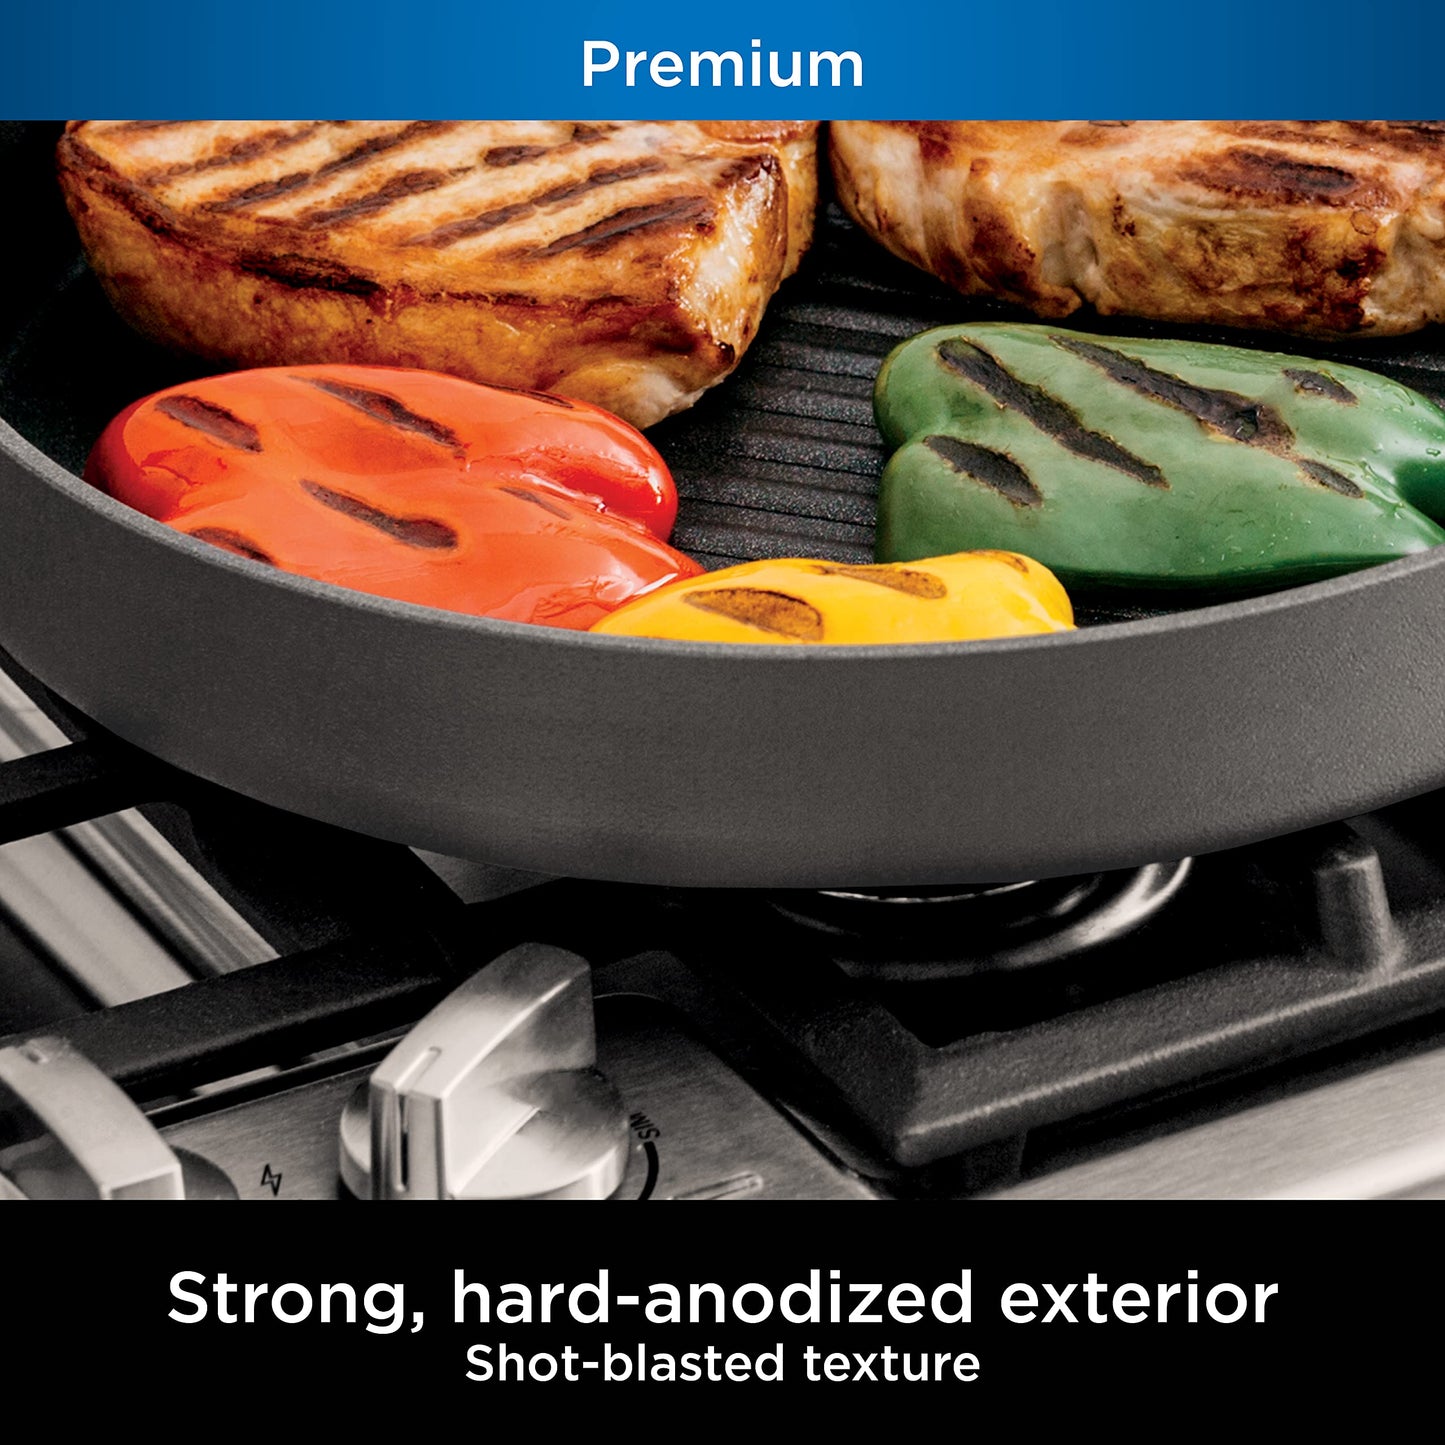 Ninja C30530 Foodi NeverStick Premium 12-Inch Round Grill Pan, Hard-Anodized, Nonstick, Durable & Oven Safe to 500°F, Slate Grey